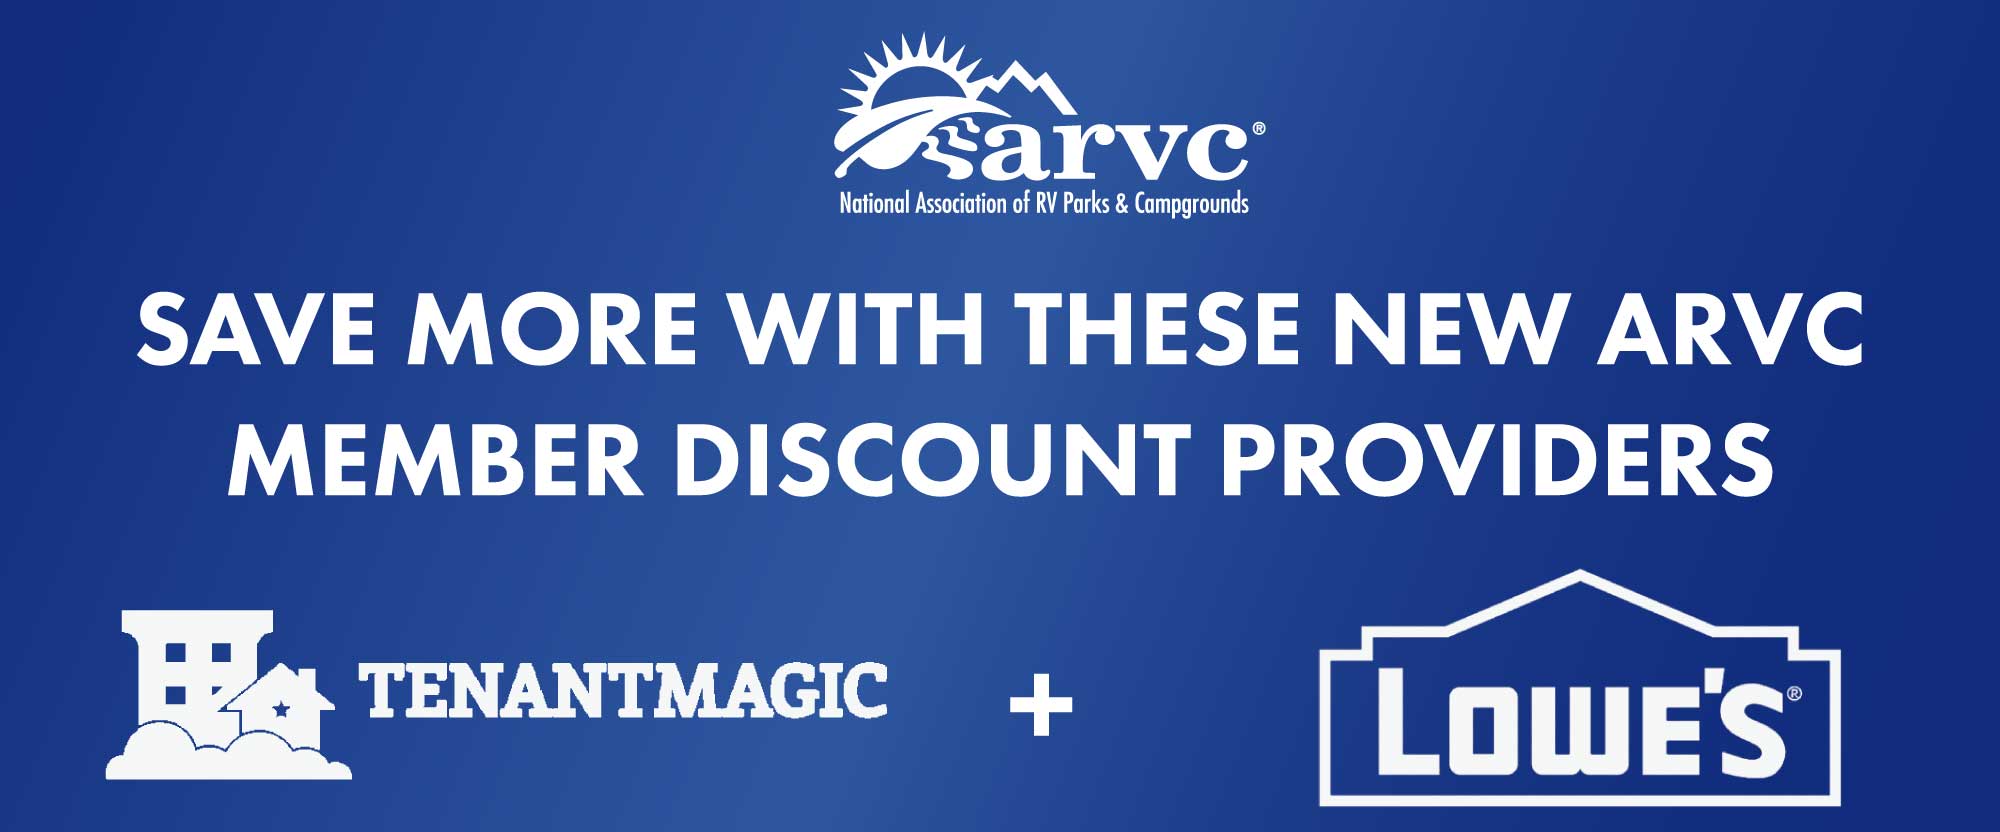 ARVC members can generate extra revenue, protect guests with background checks, save time and money with new discount programs from Lowe's and TenantMagic 